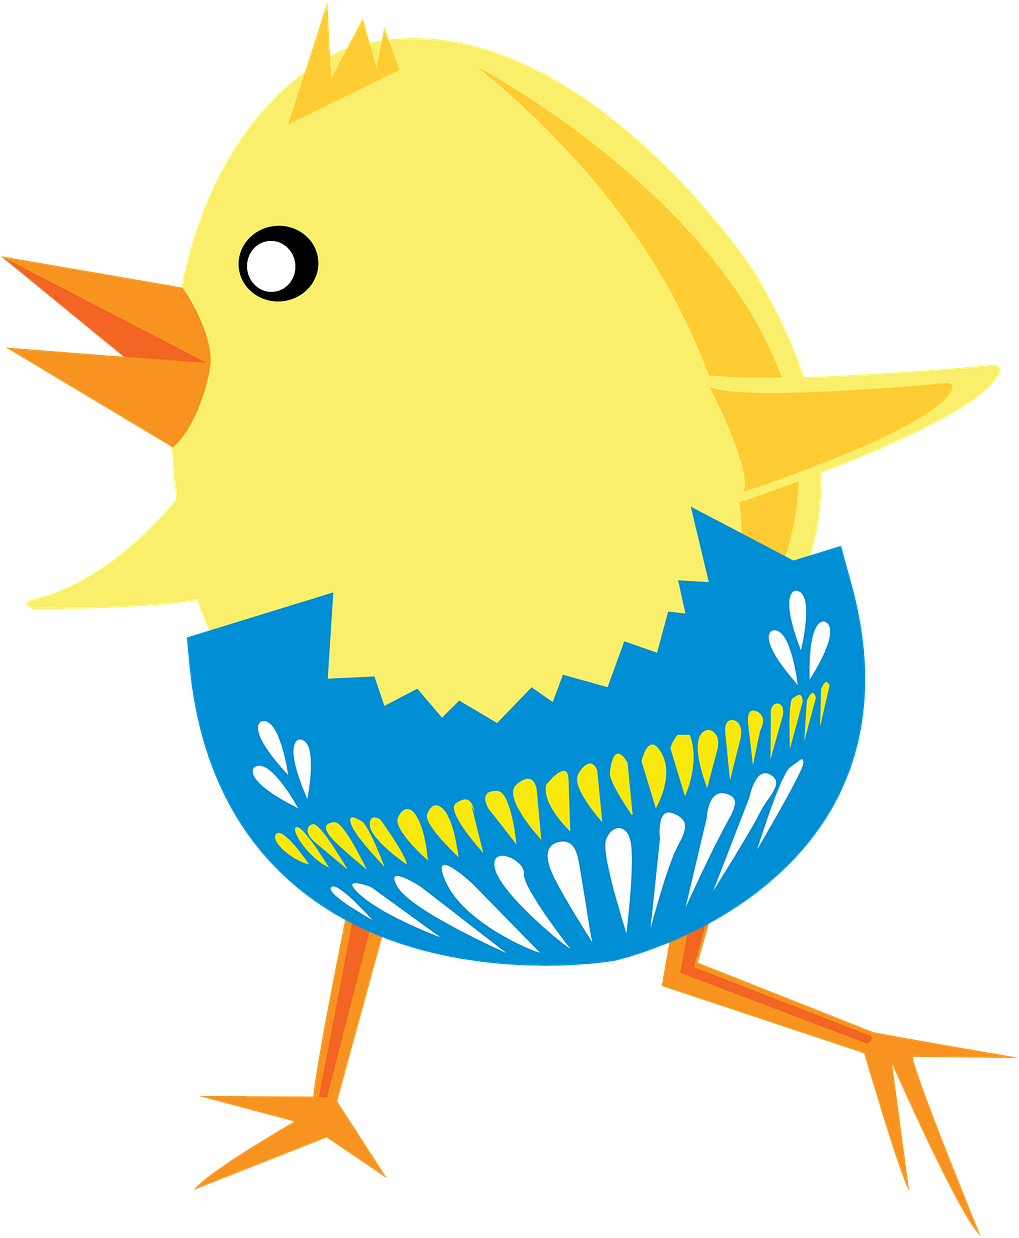 A Cartoon Of A Chick In A Blue And Yellow Egg Shell